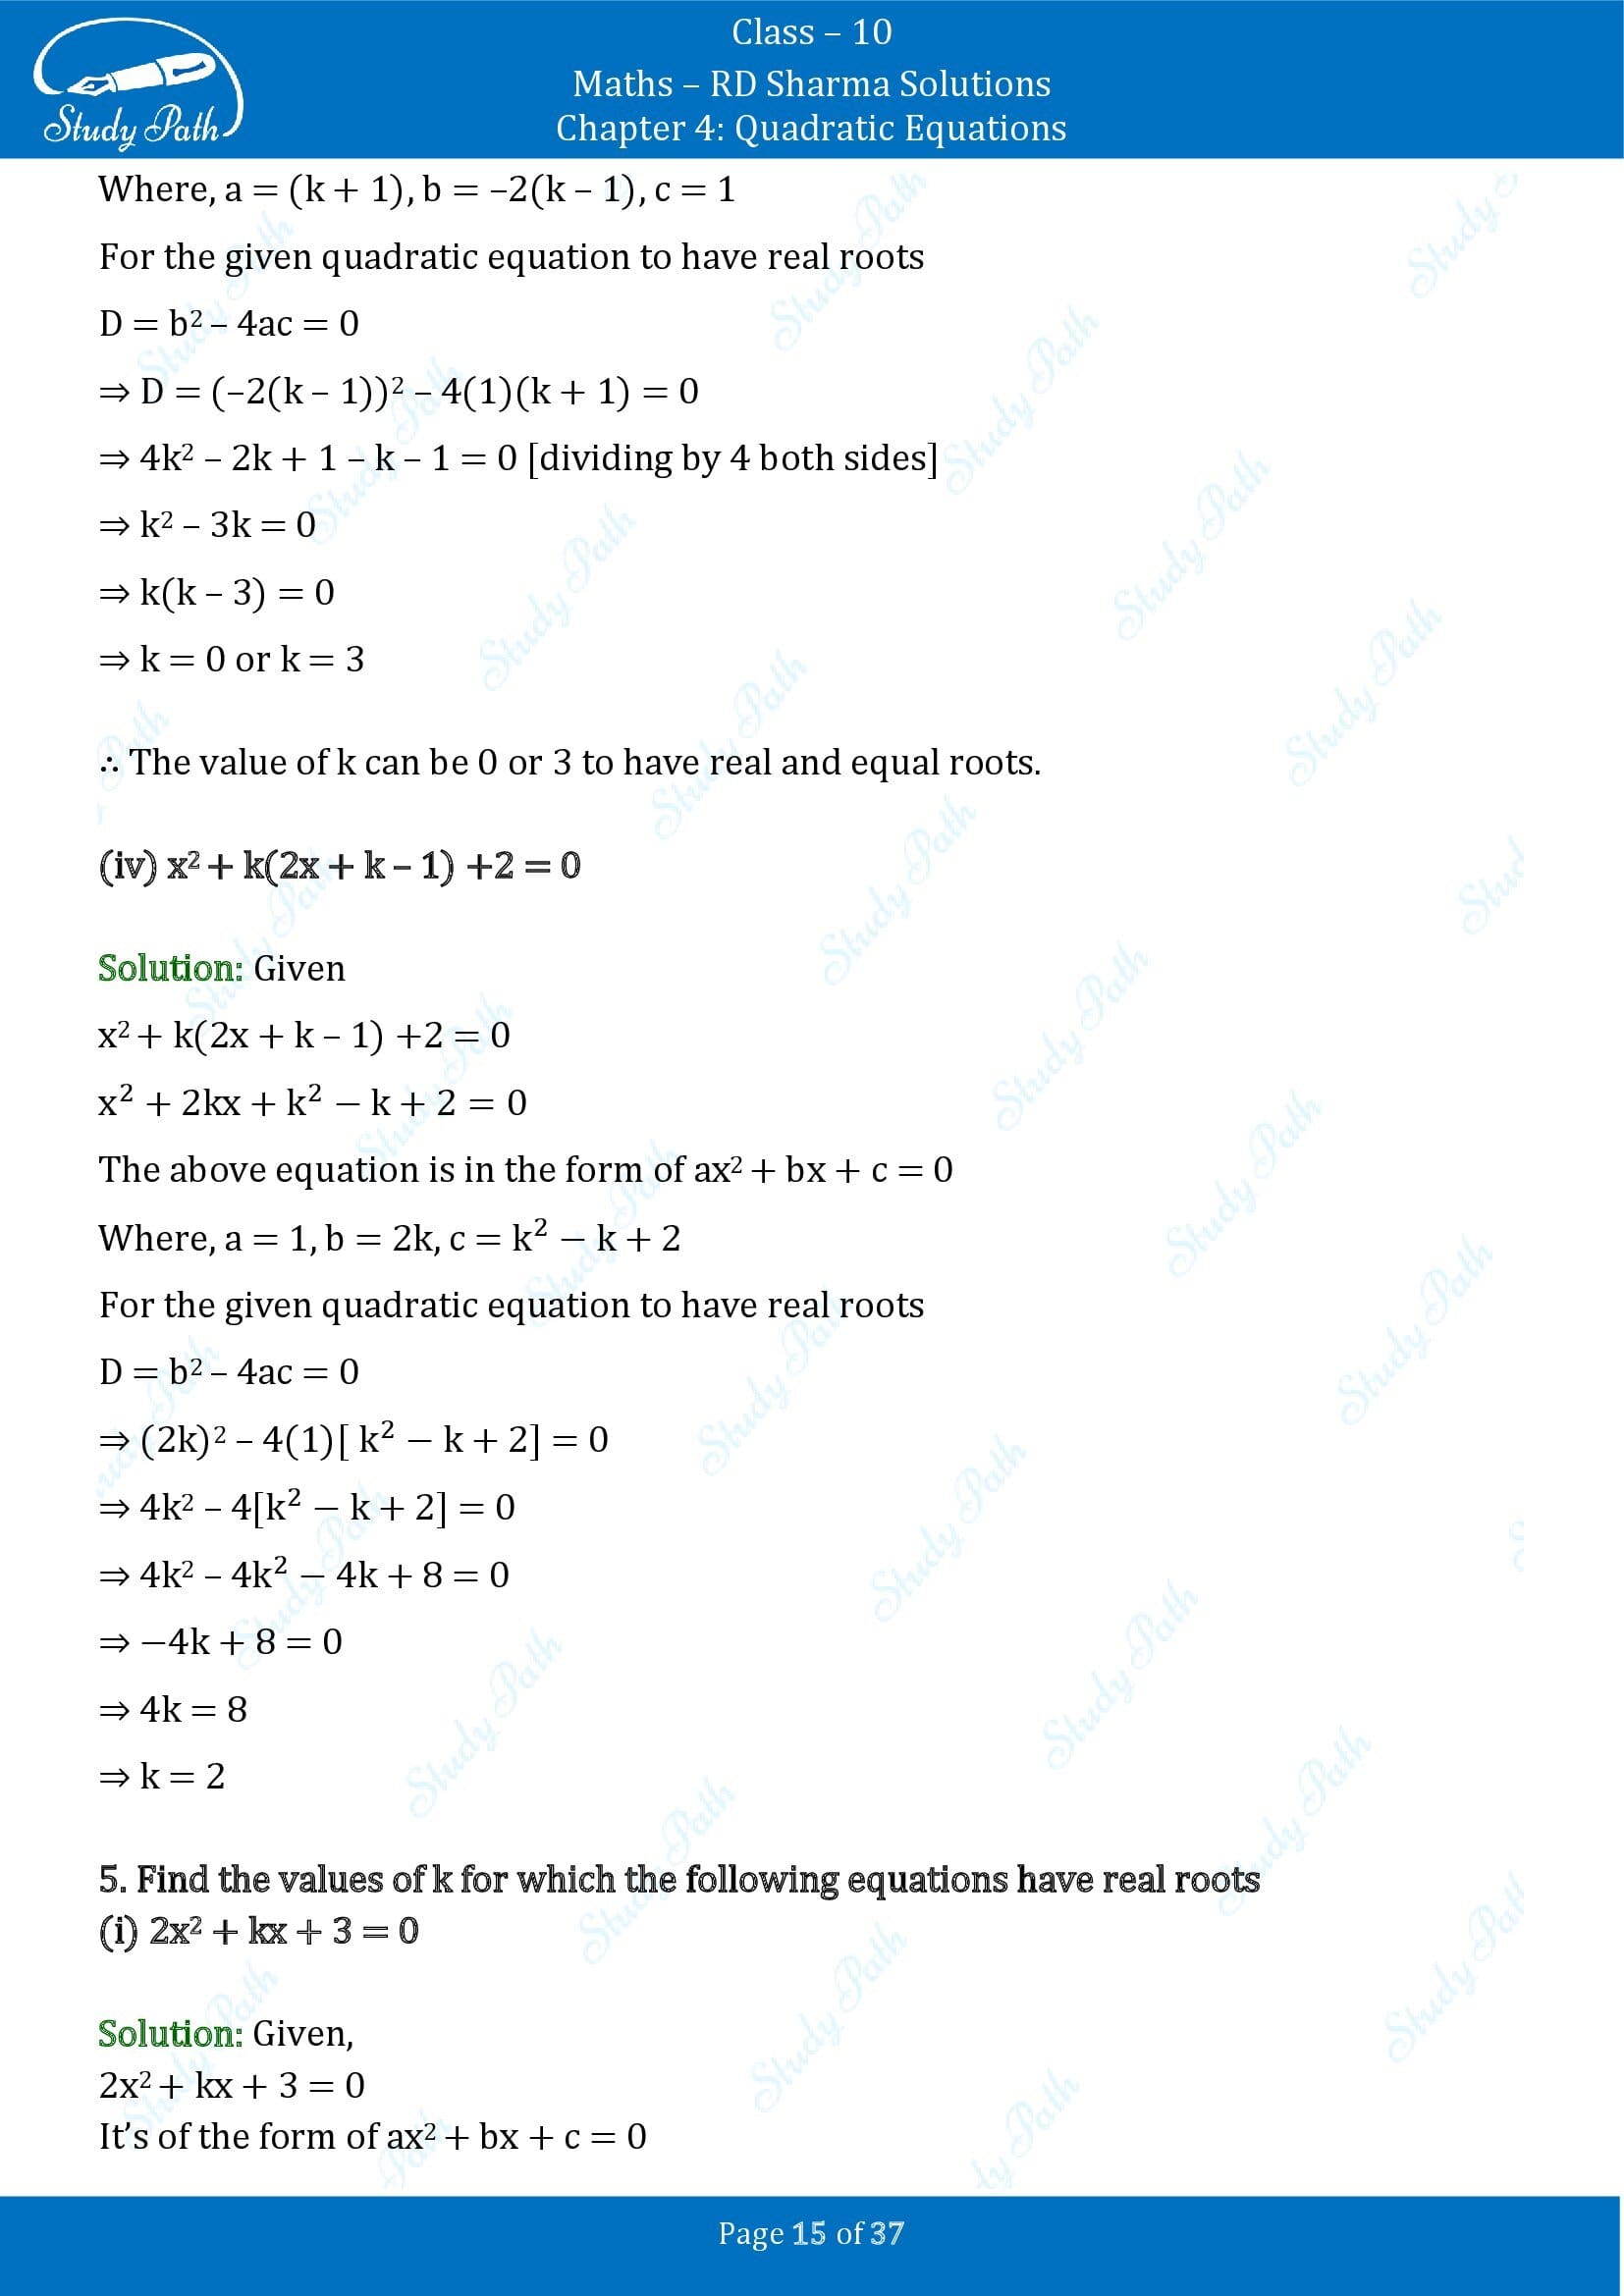 RD Sharma Solutions Class 10 Chapter 4 Quadratic Equations Exercise 4.6 00015